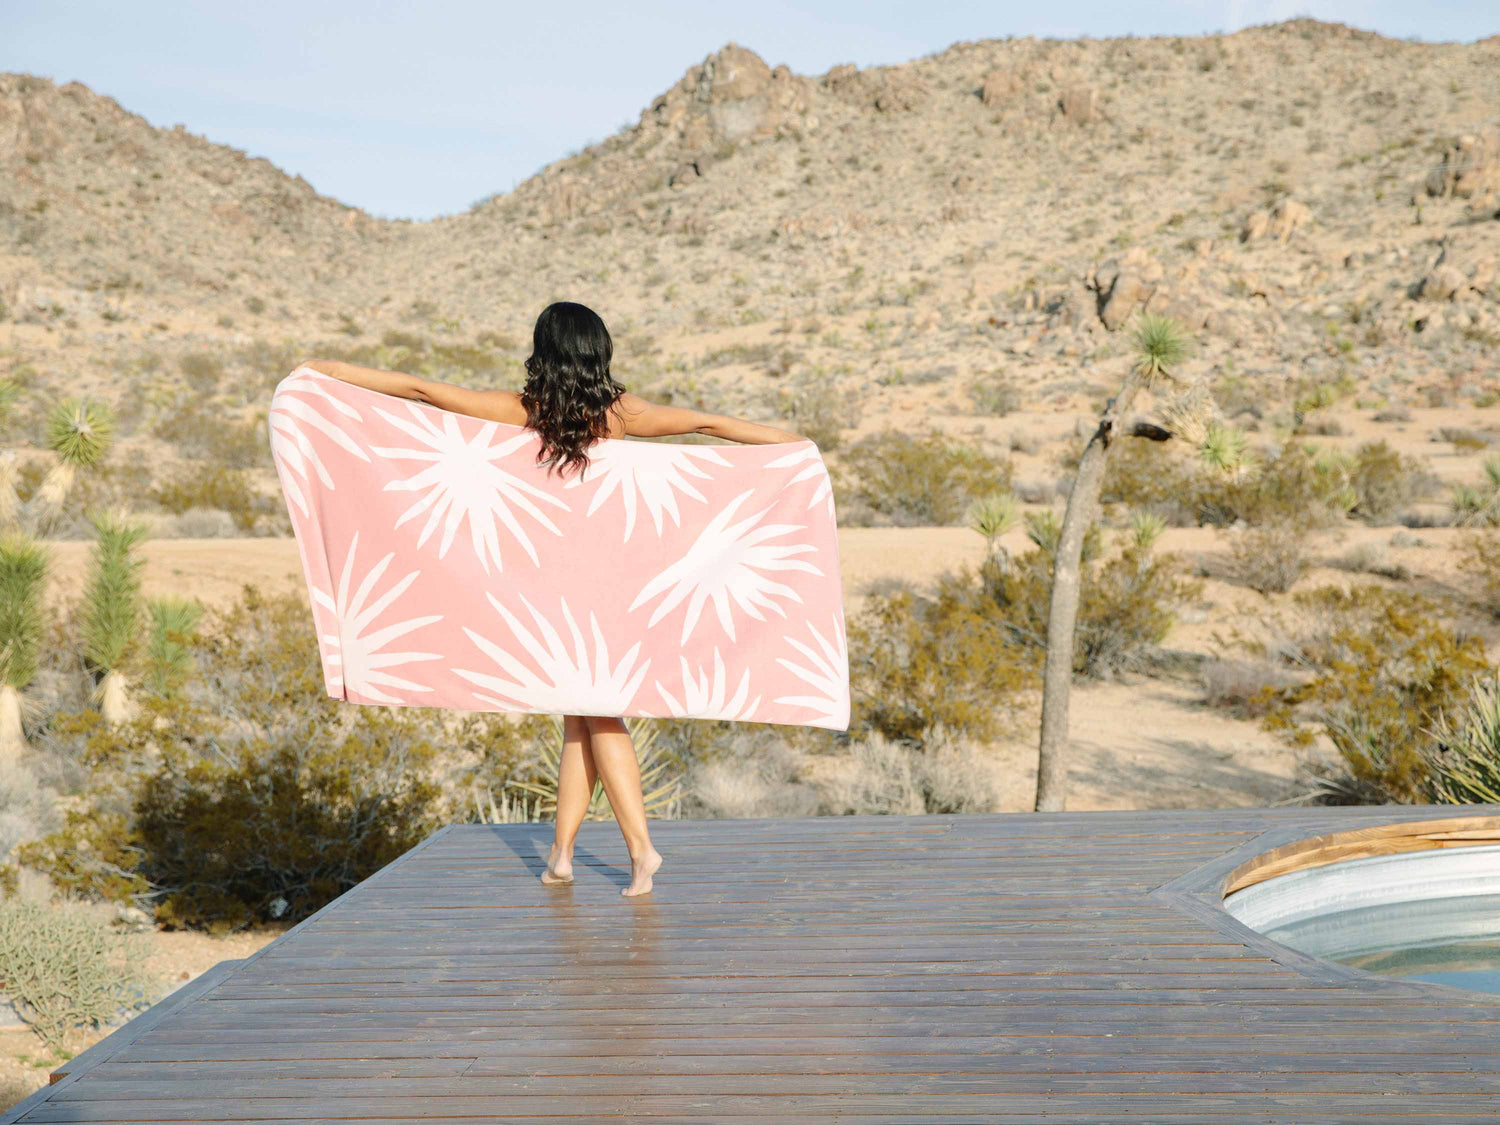 
      A woman standing on a deck in the desert with her back turned, holding out a pink and white tropical patterned cabana beach towel.
    